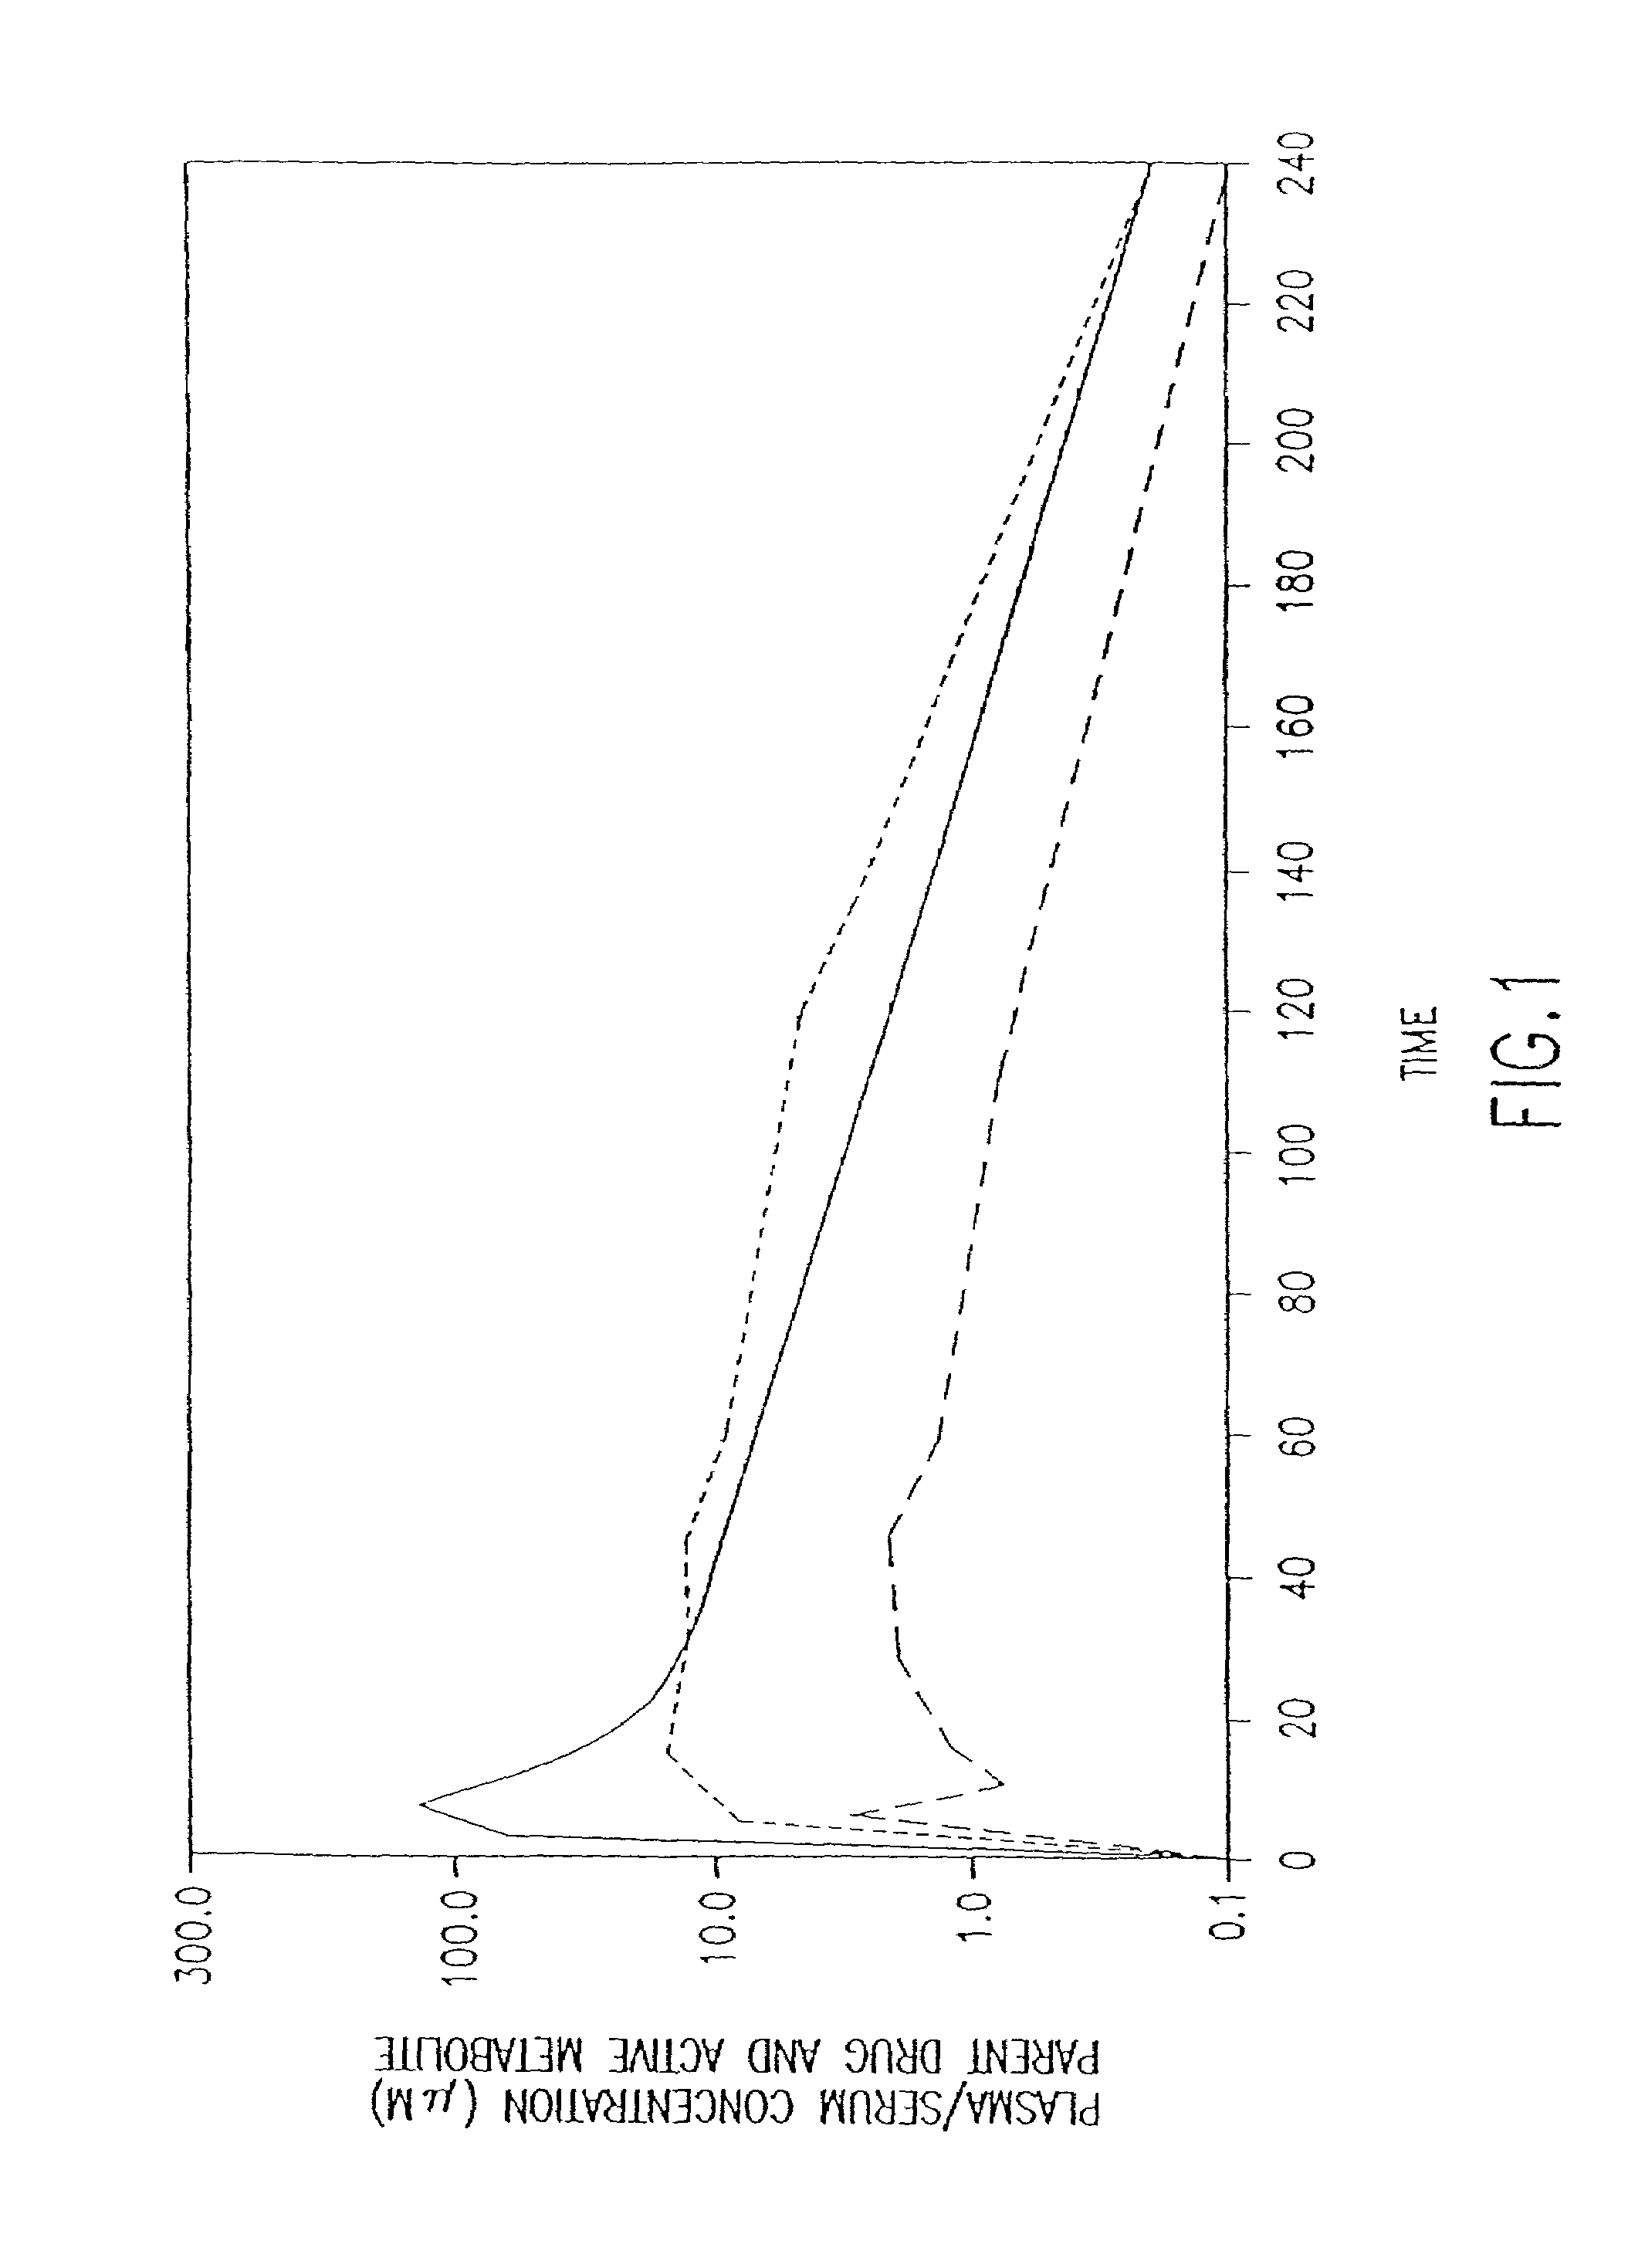 Methods for the administration of amifostine and related compounds